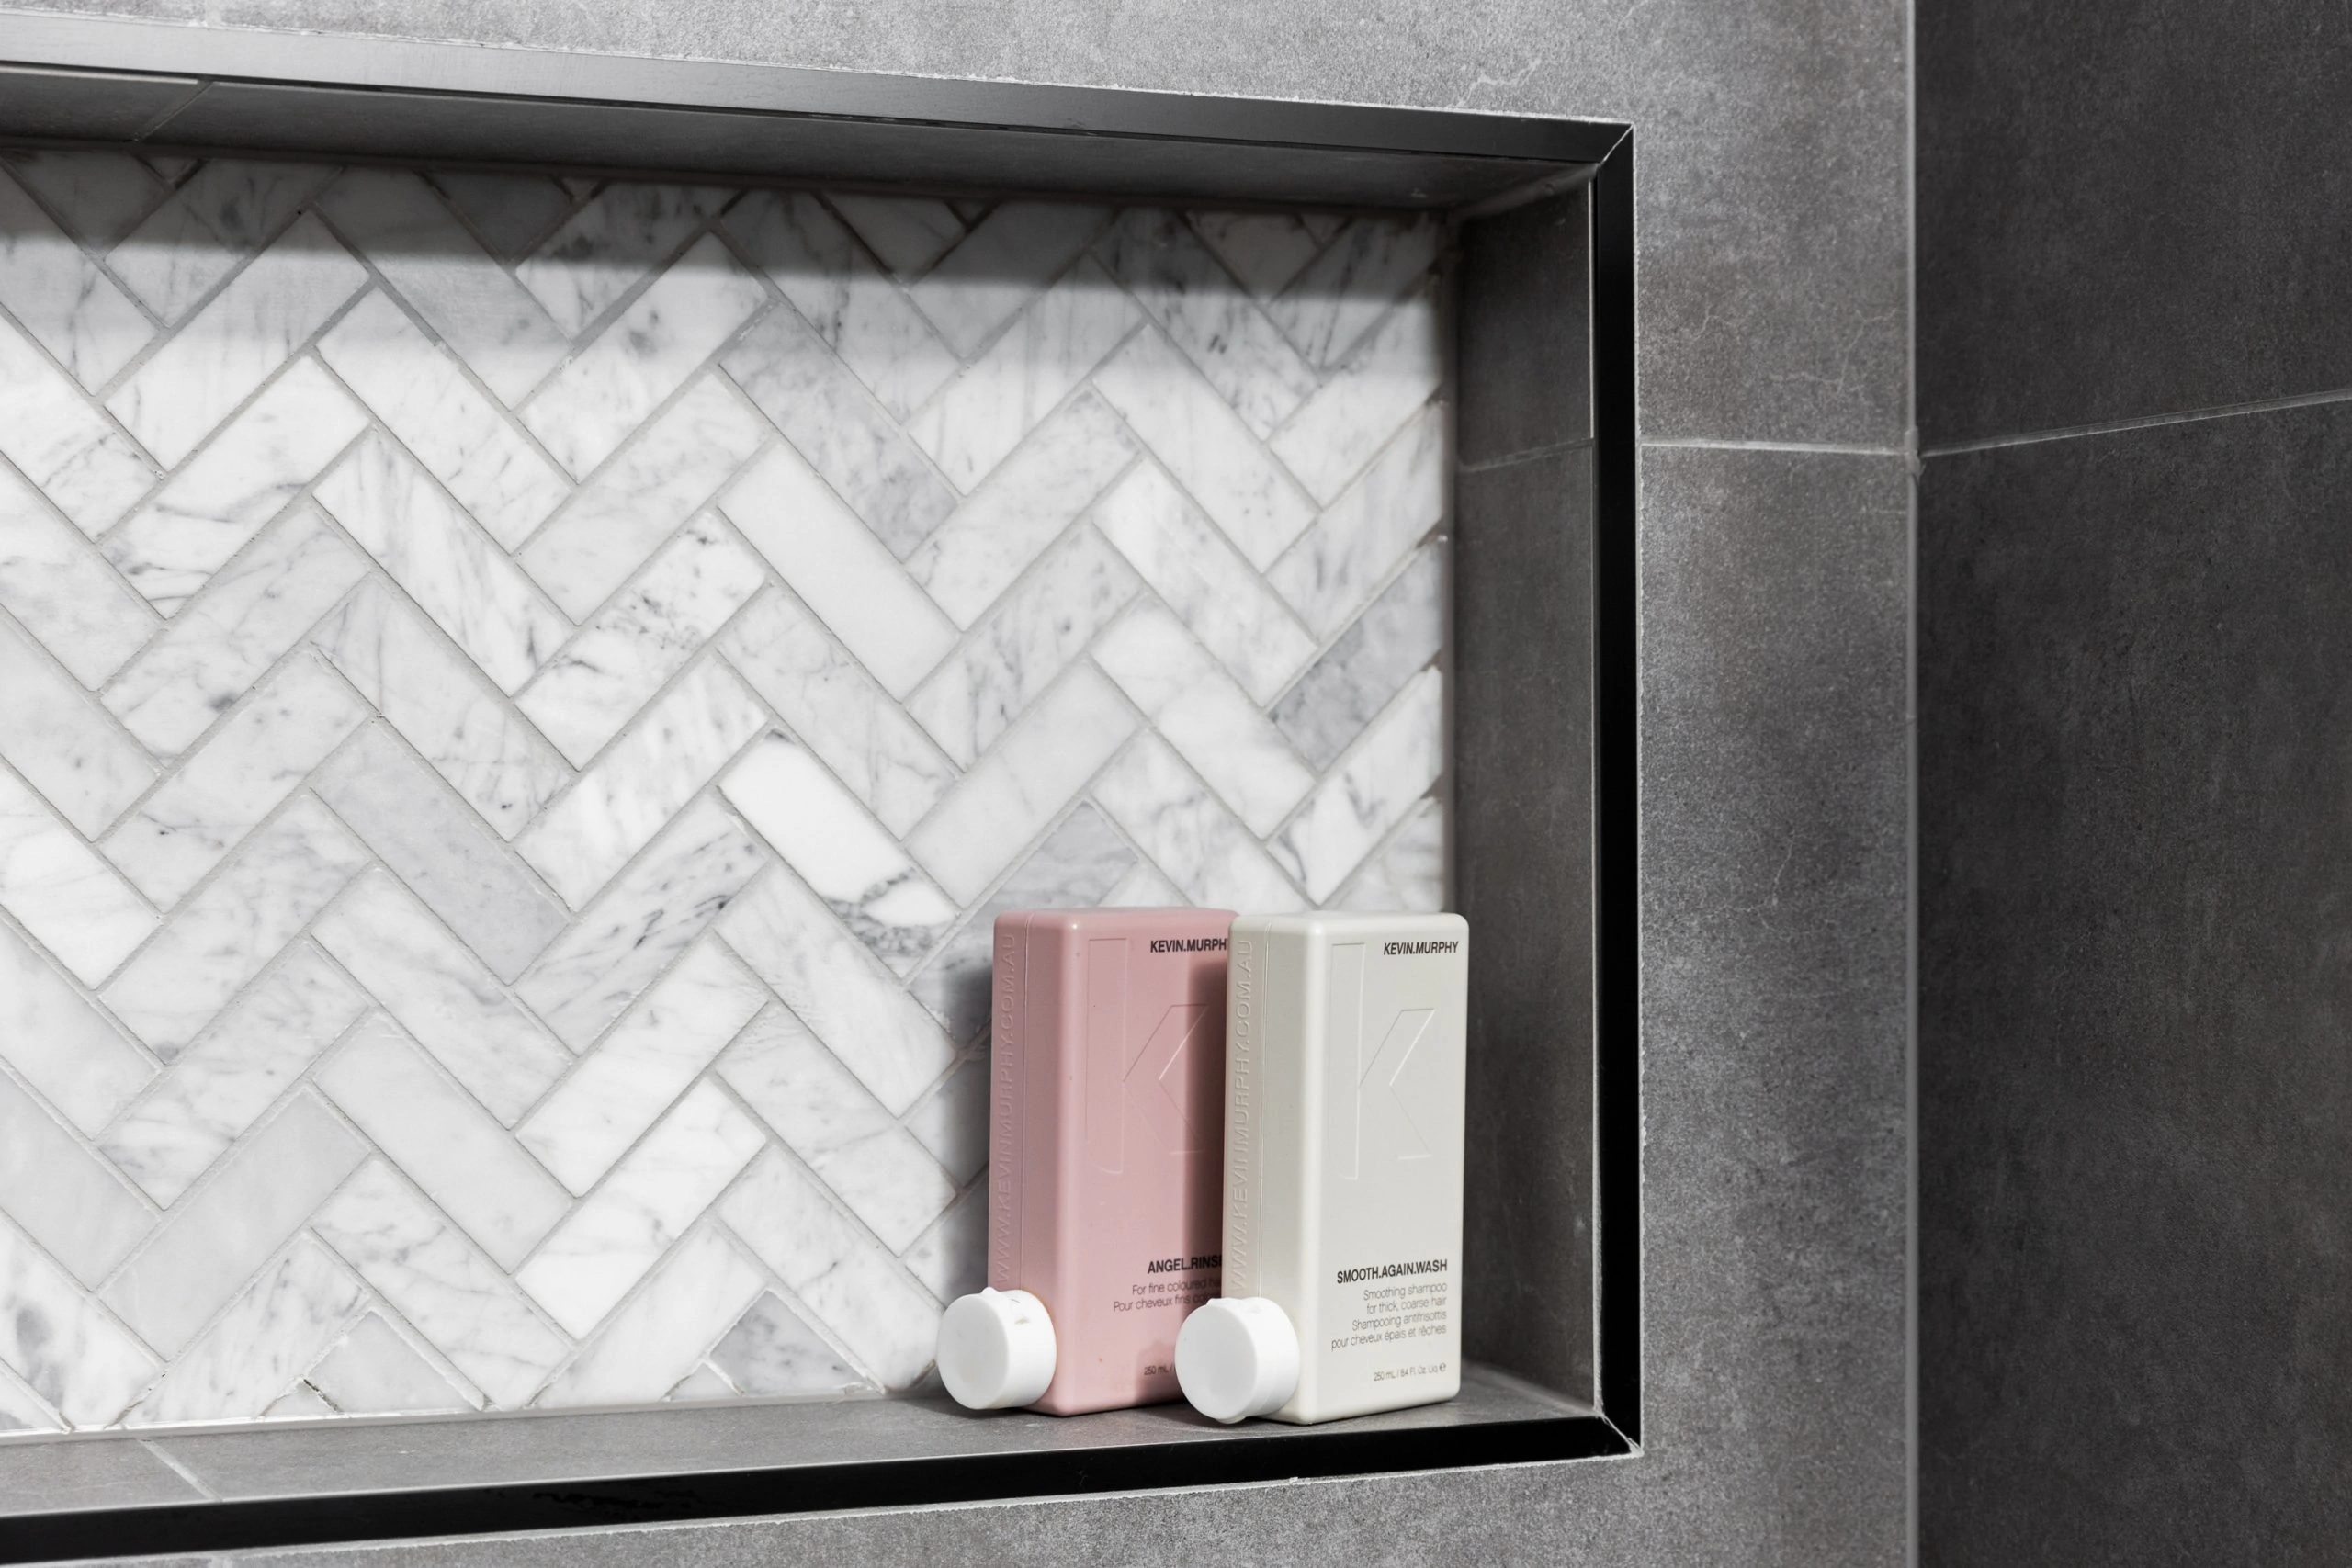 Dark grey bathroom tiles with a shower niche containing products